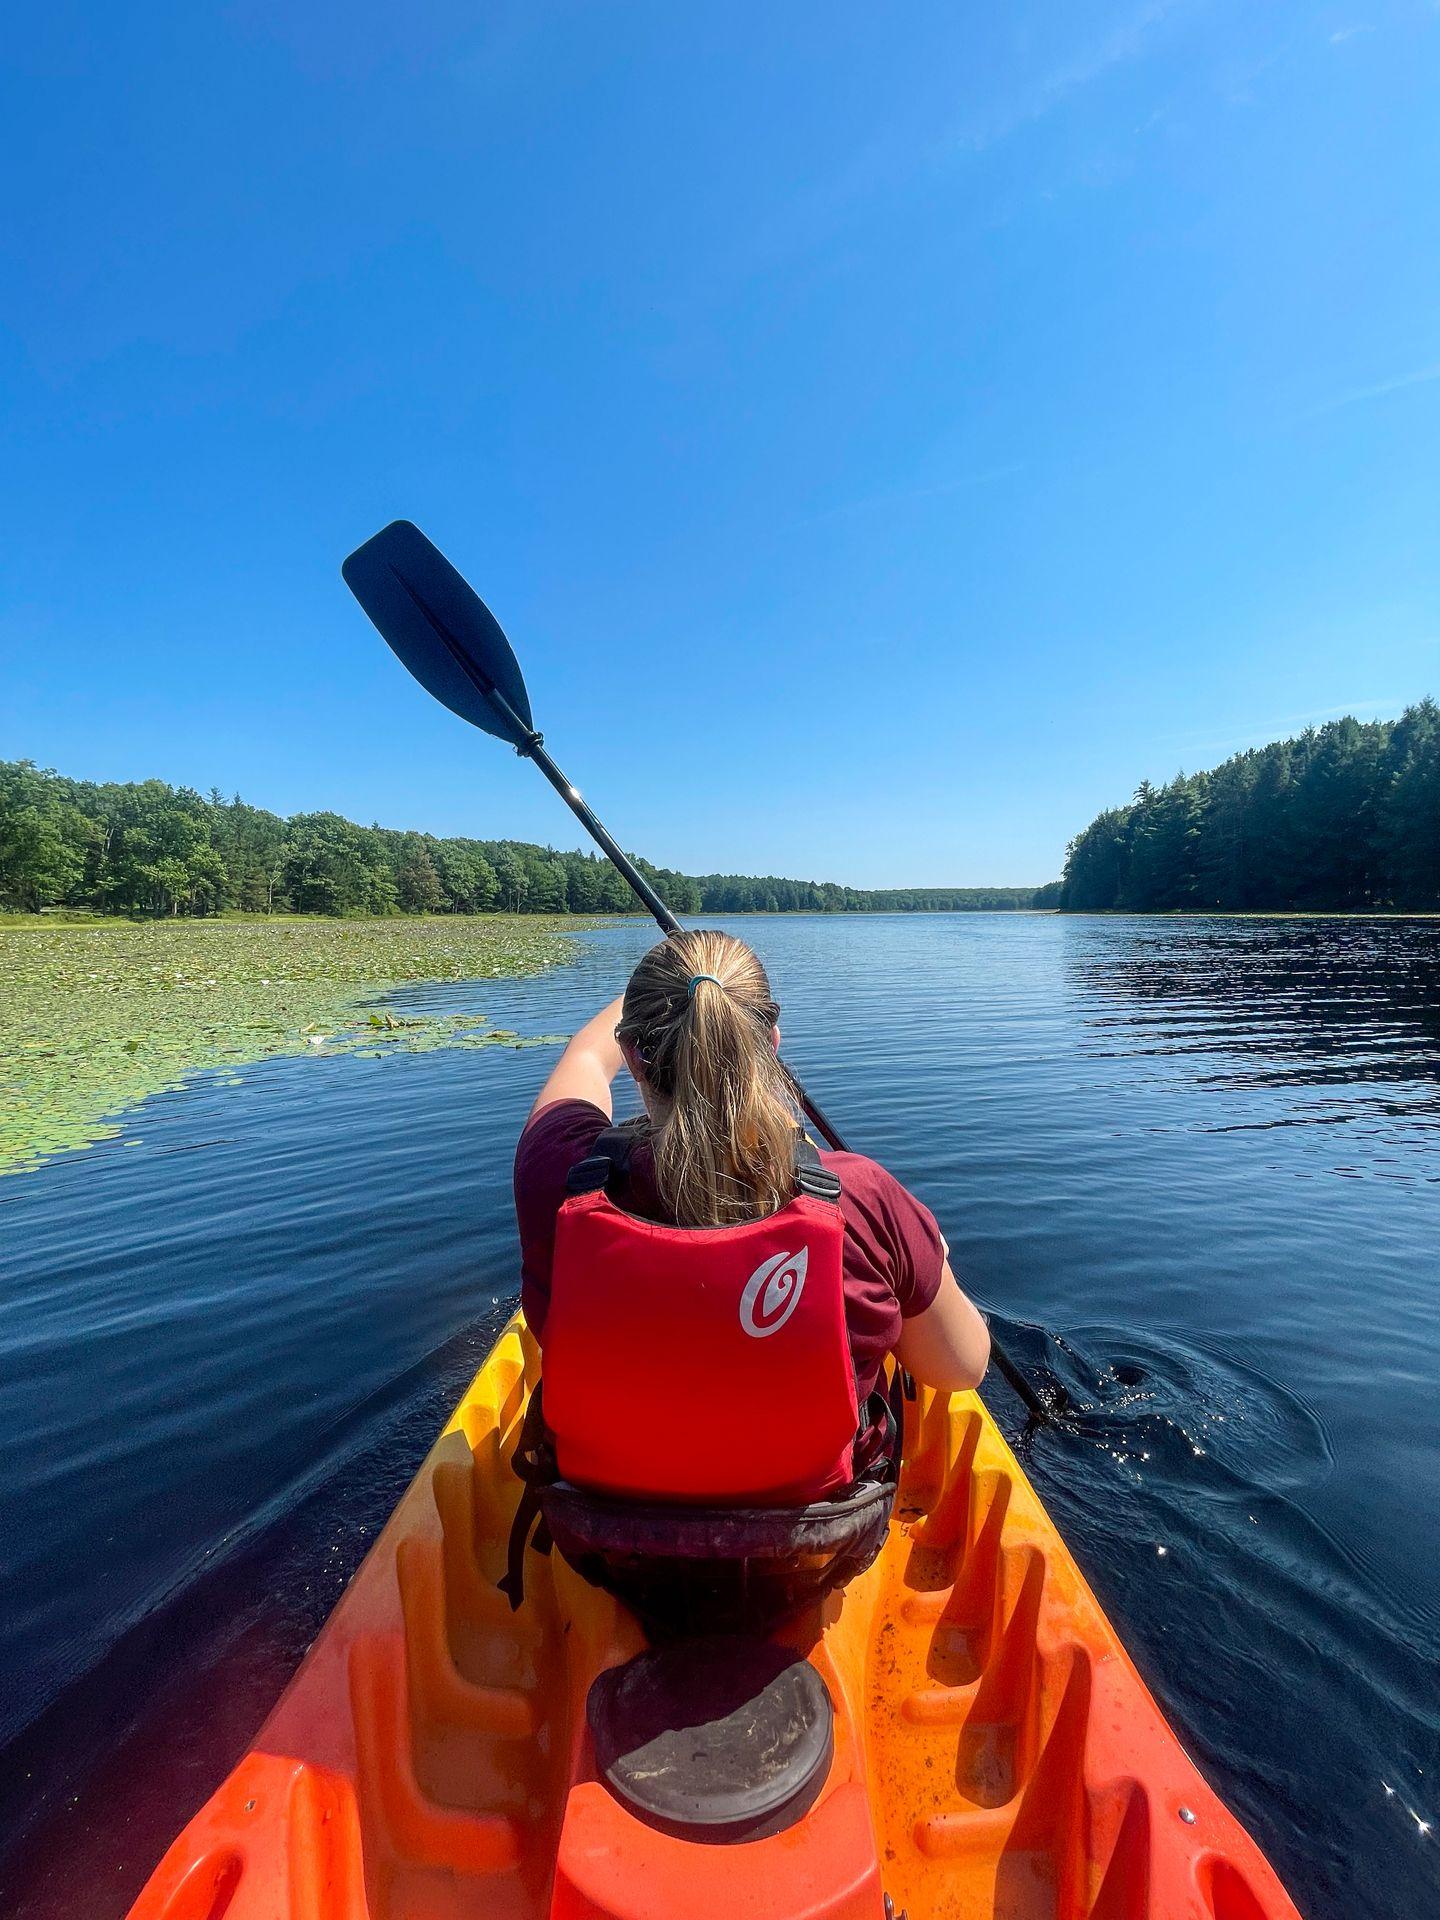 A few from behind of Lydia kayaking on Black Moshannon Lake. The lake is a dark, blackish color and there are thick, green lilypads to the left.